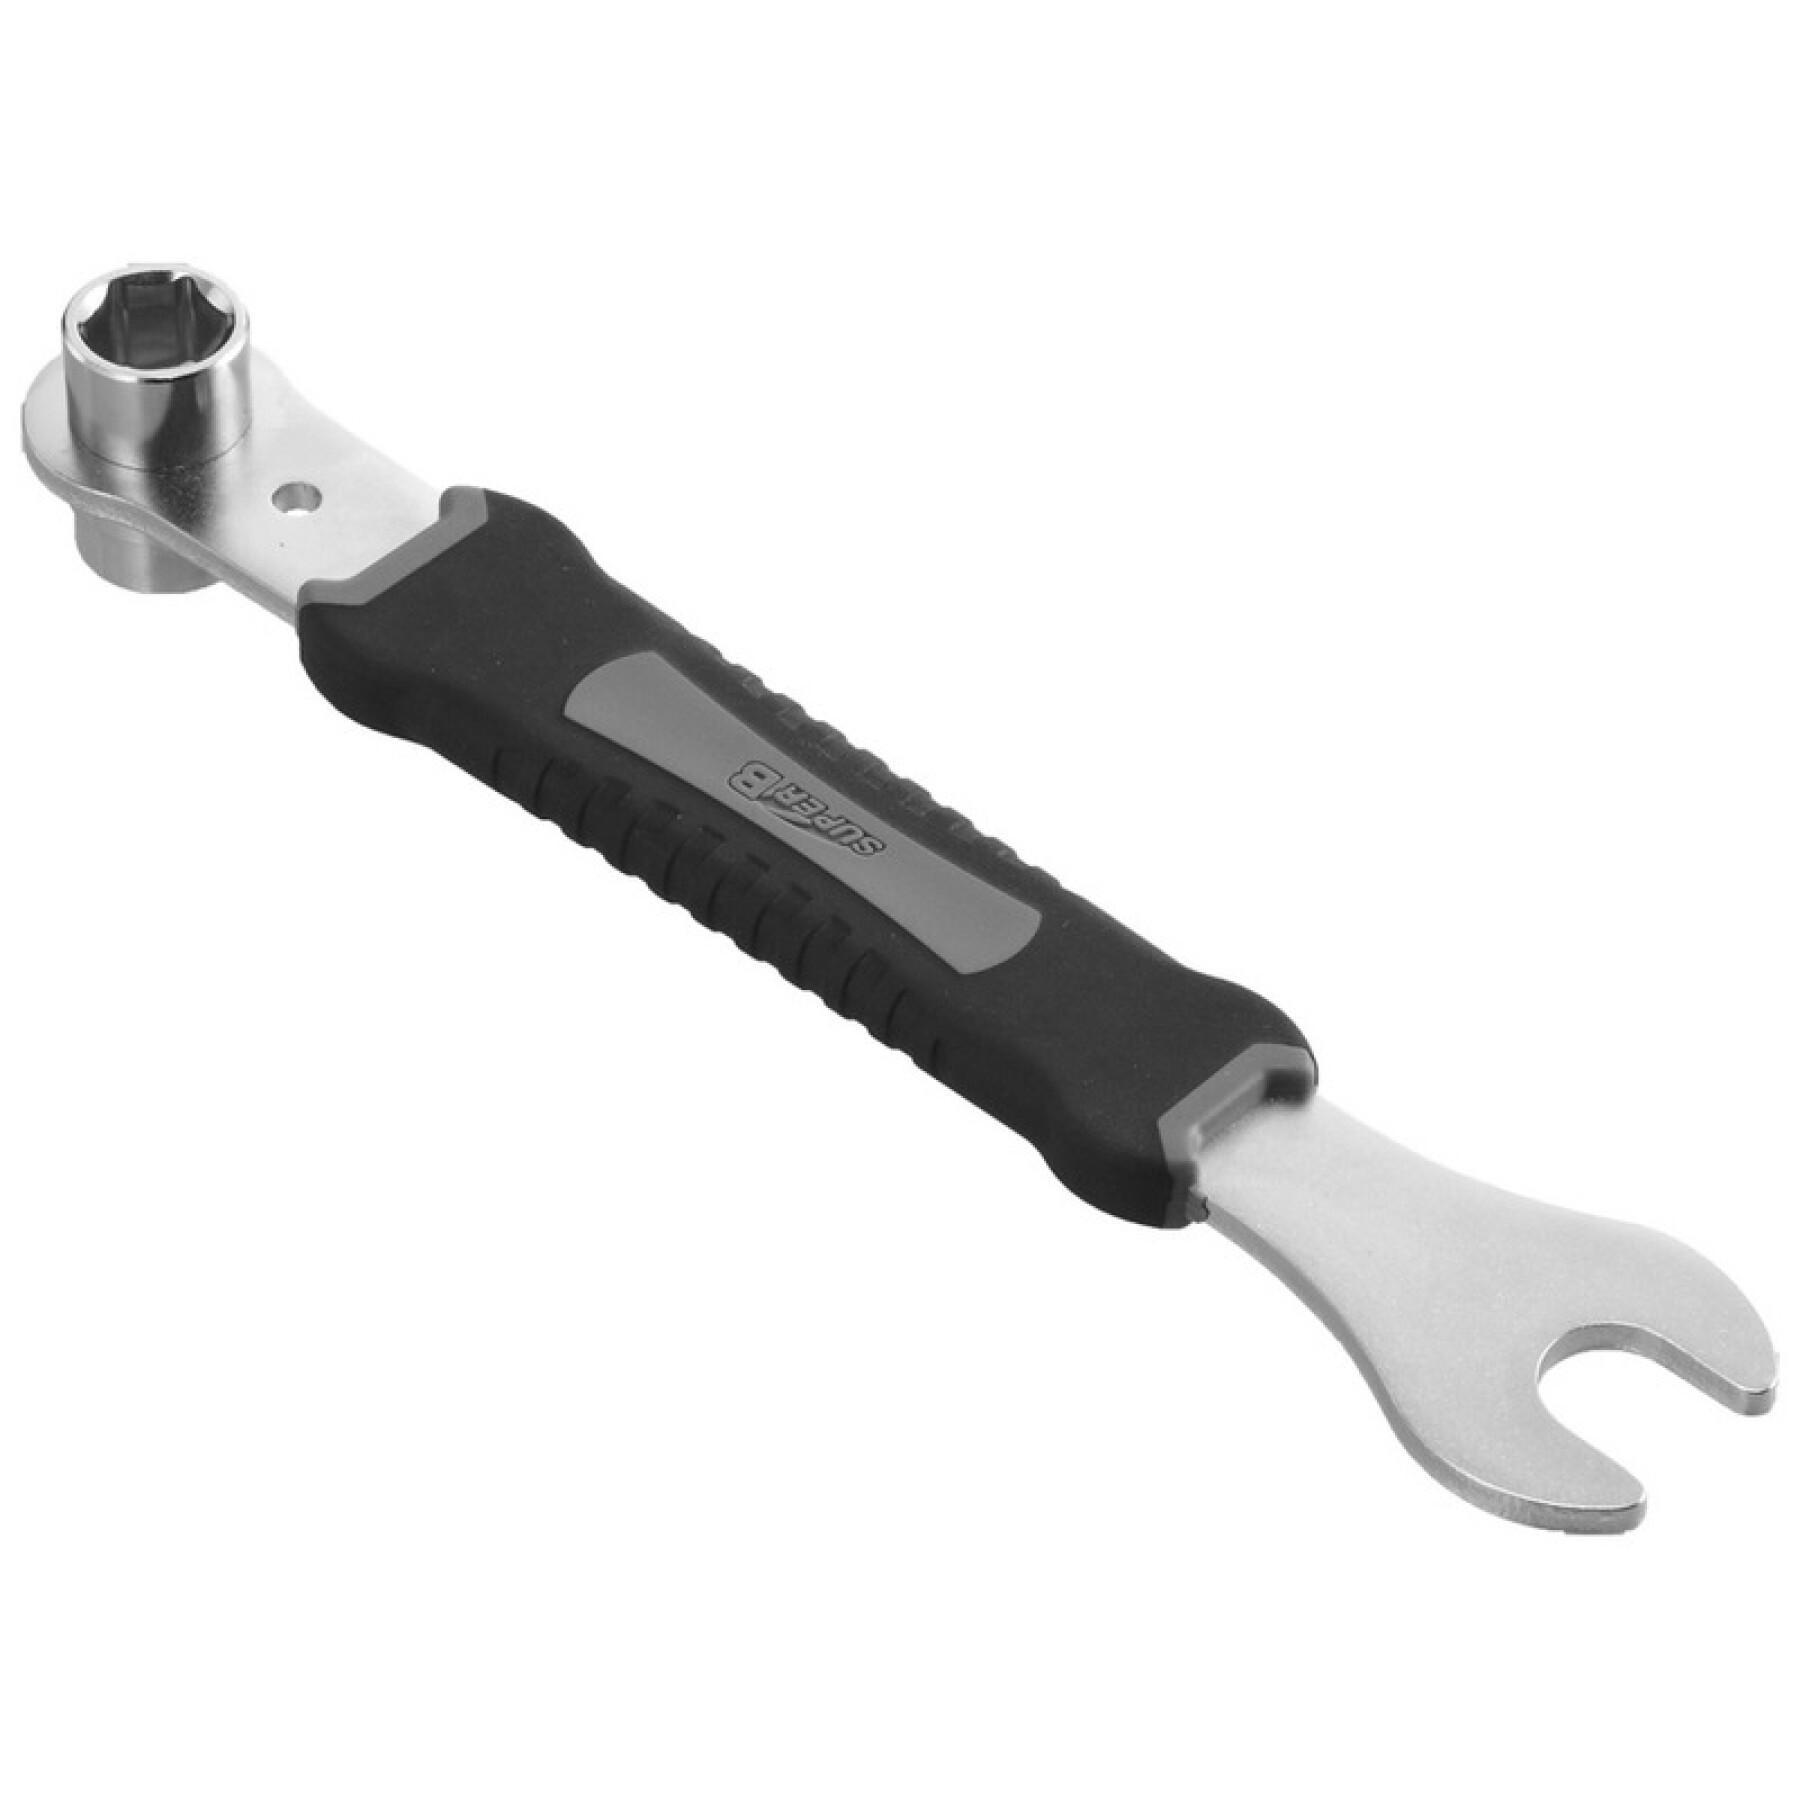 Multifunctional pedal wrench Super B